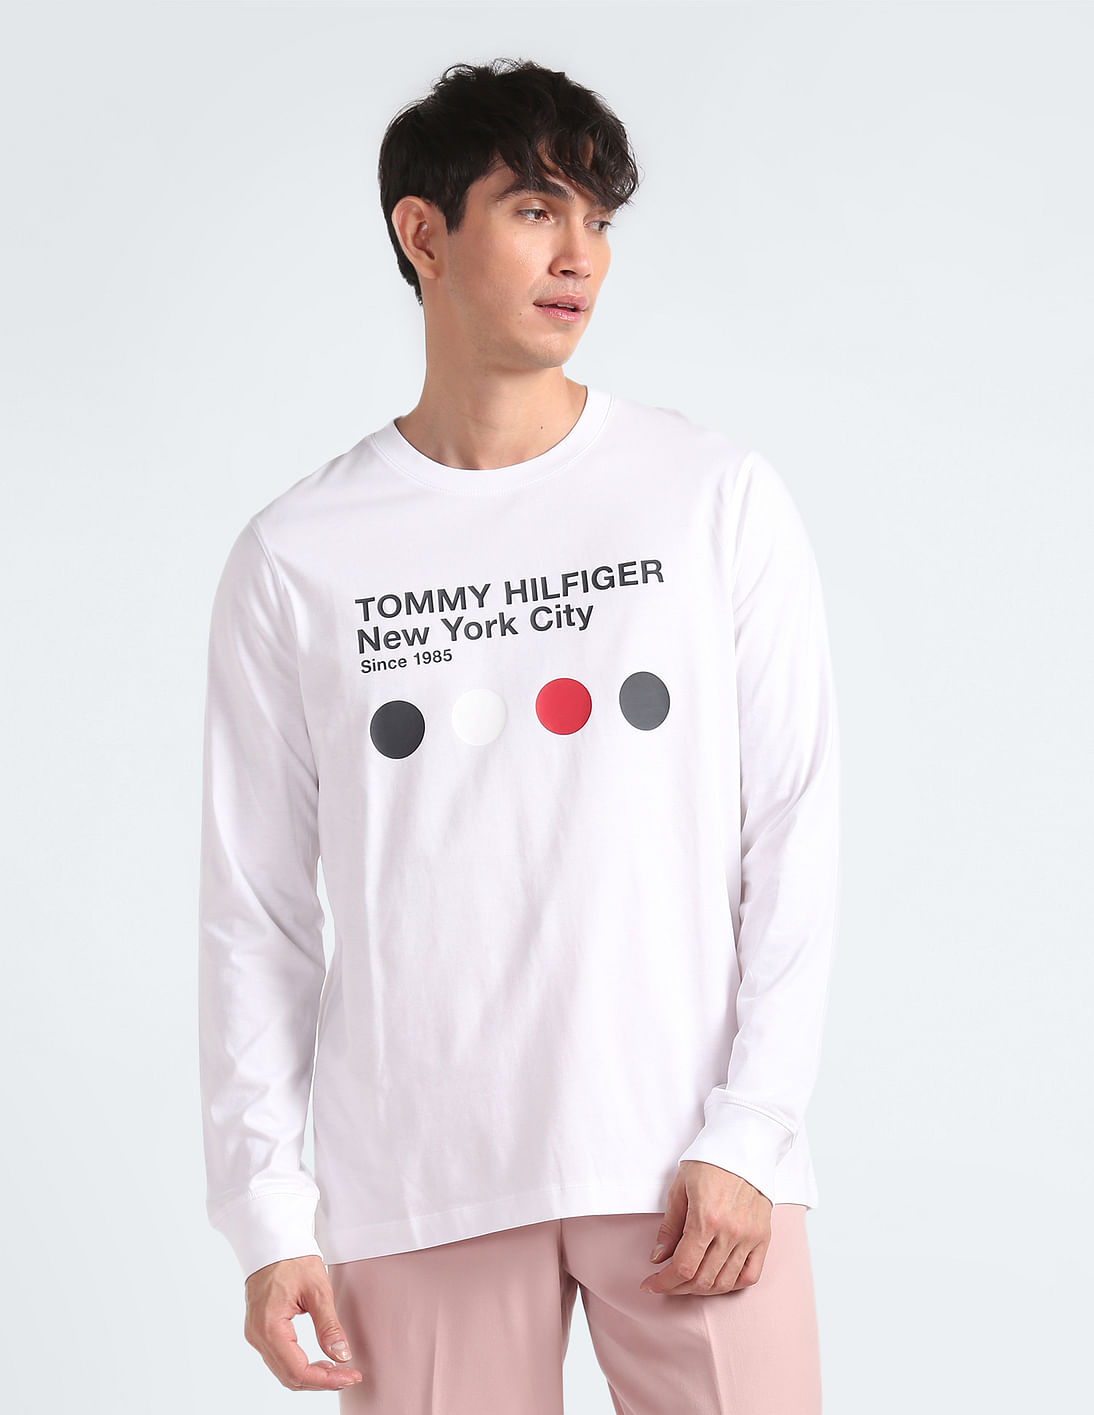 Typographic Long T-Shirt Sleeve Hilfiger Tommy Buy Print